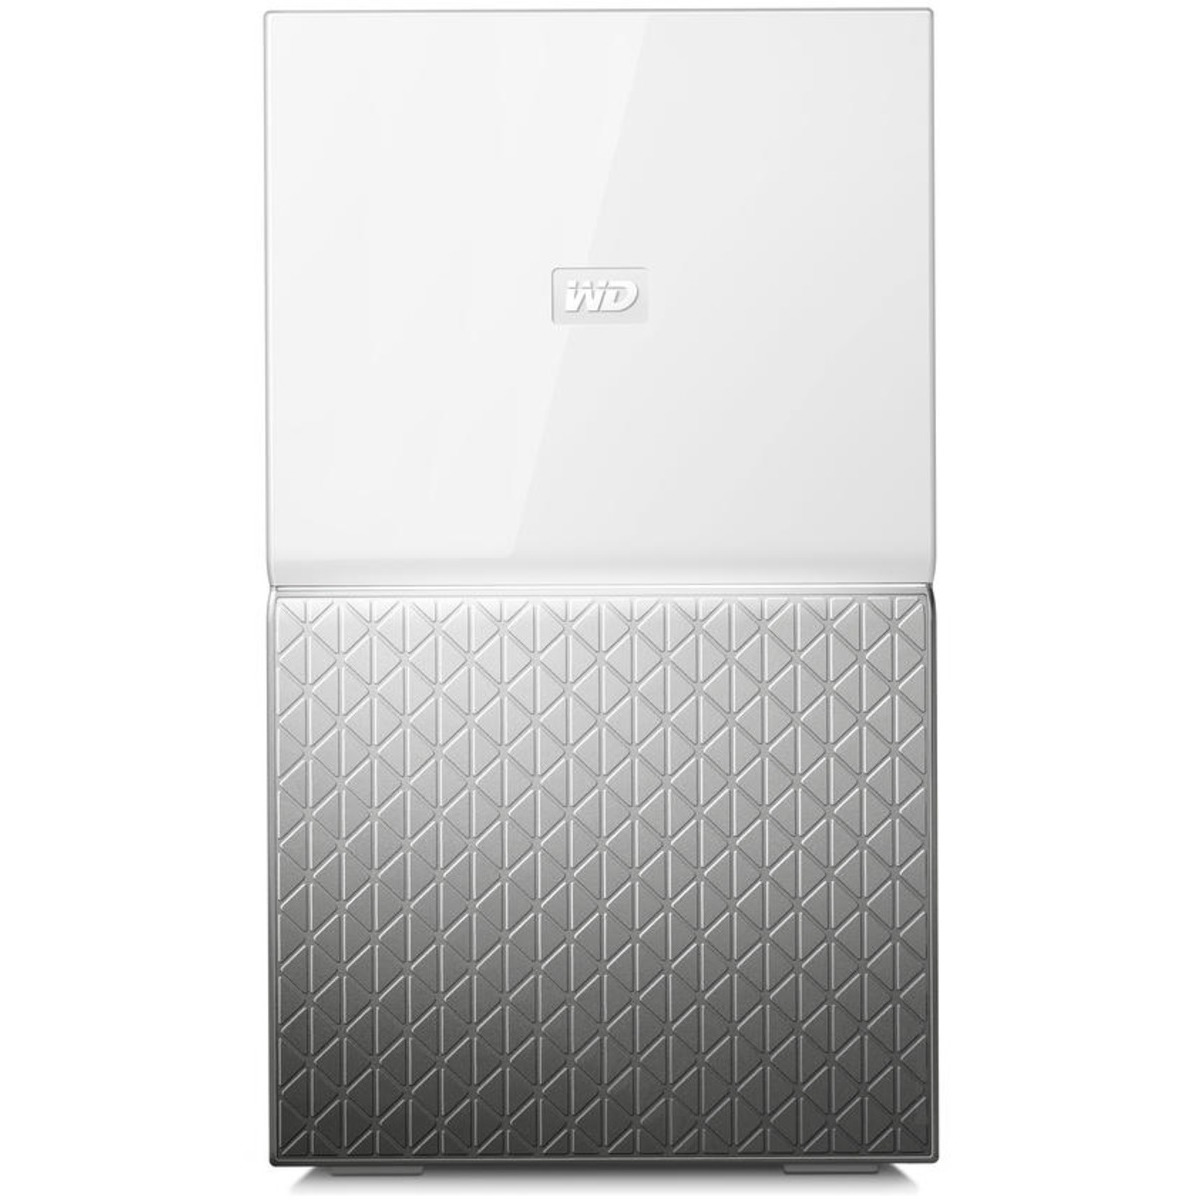 Western Digital My Cloud Home Duo 44tb 2-Bay Desktop Personal / Basic Home / Small Office DAS - Direct Attached Storage Device 2x22tb Western Digital Red Pro WD221KFGX 3.5 7200rpm SATA 6Gb/s HDD NAS Class Drives Installed - Burn-In Tested My Cloud Home Duo